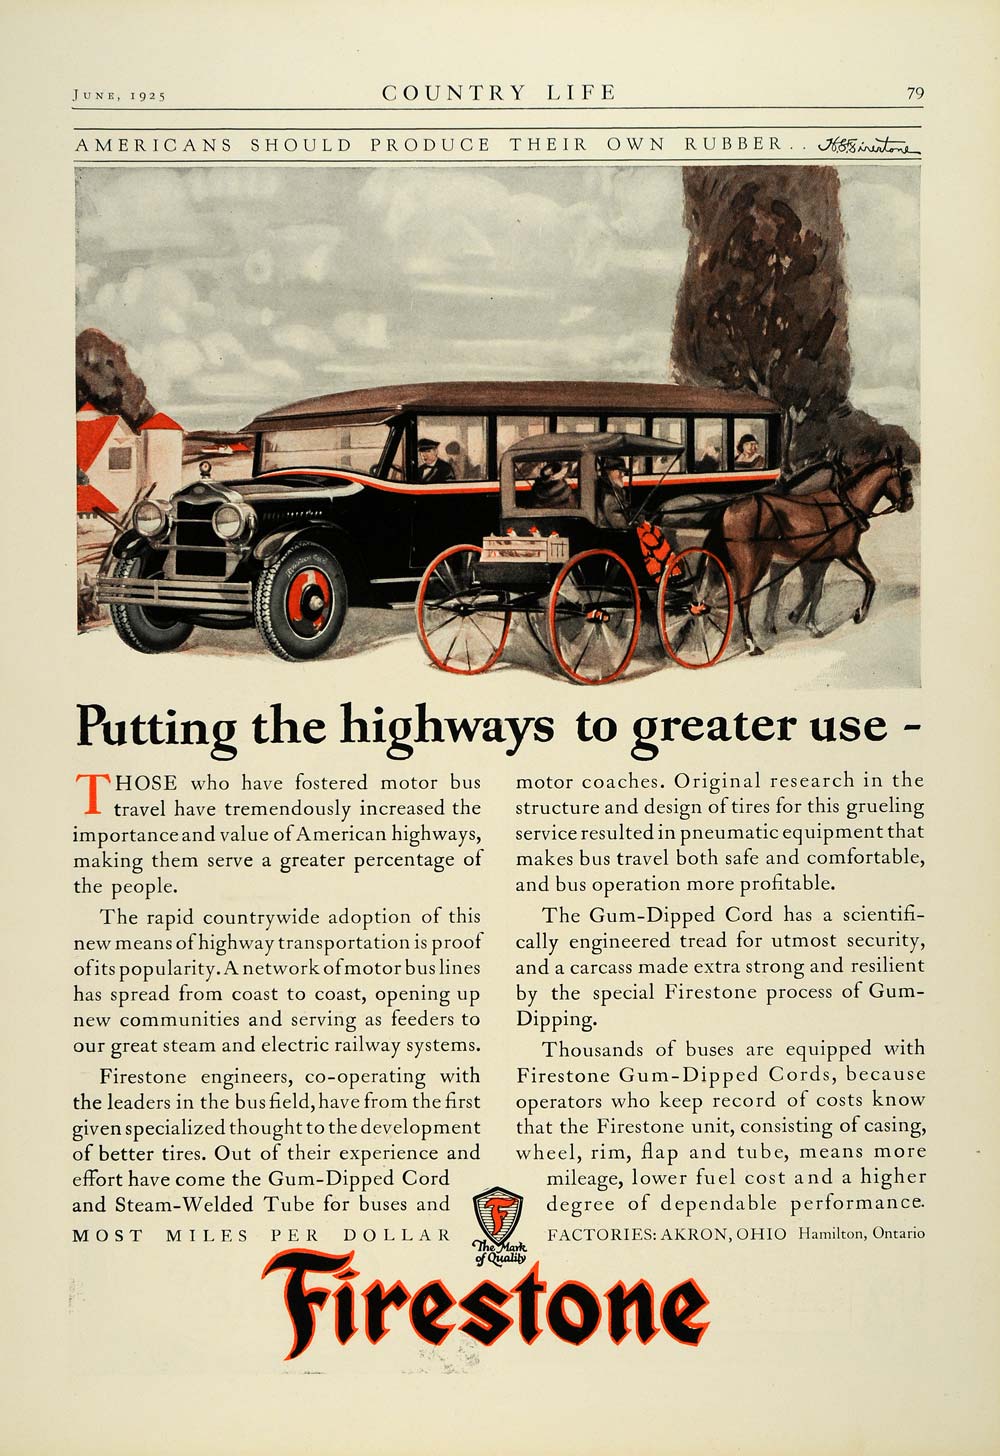 1925 Ad Firestone Gum-Dipped Cord Steam-Welded Tube Auto Tires Carriage COL2